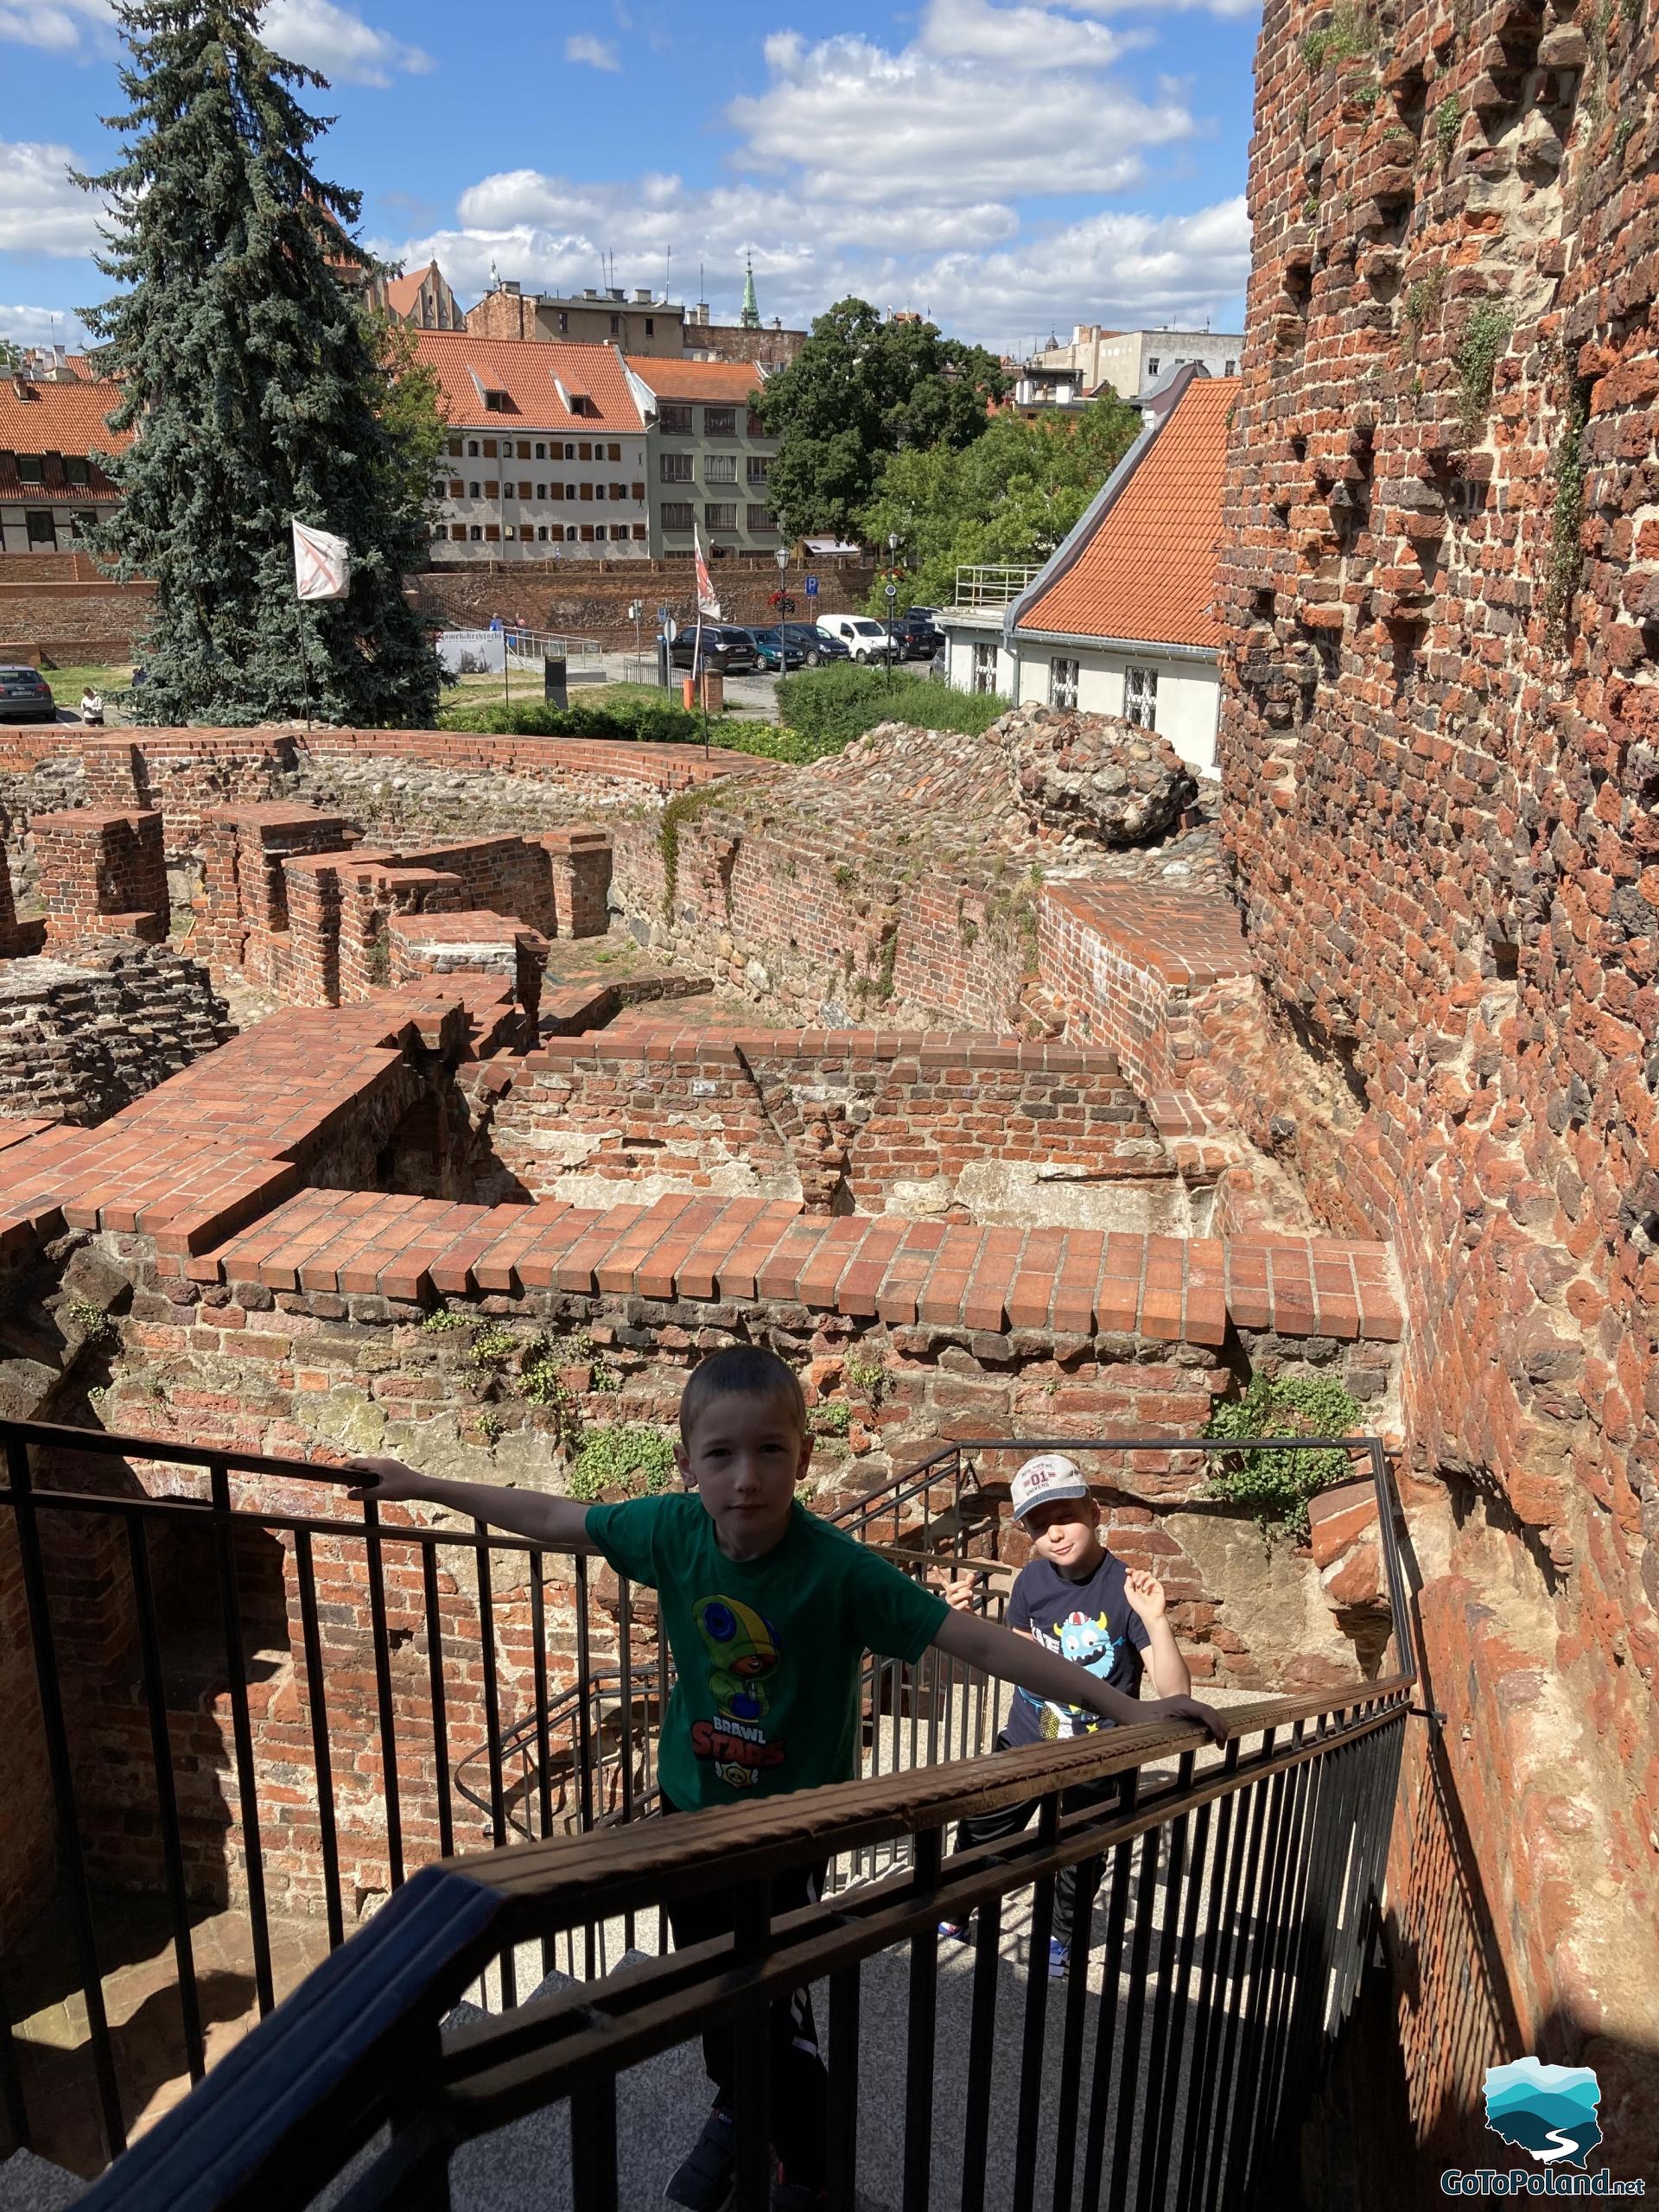 two children are climbing on the stairs to the ruins of a former red brick castle